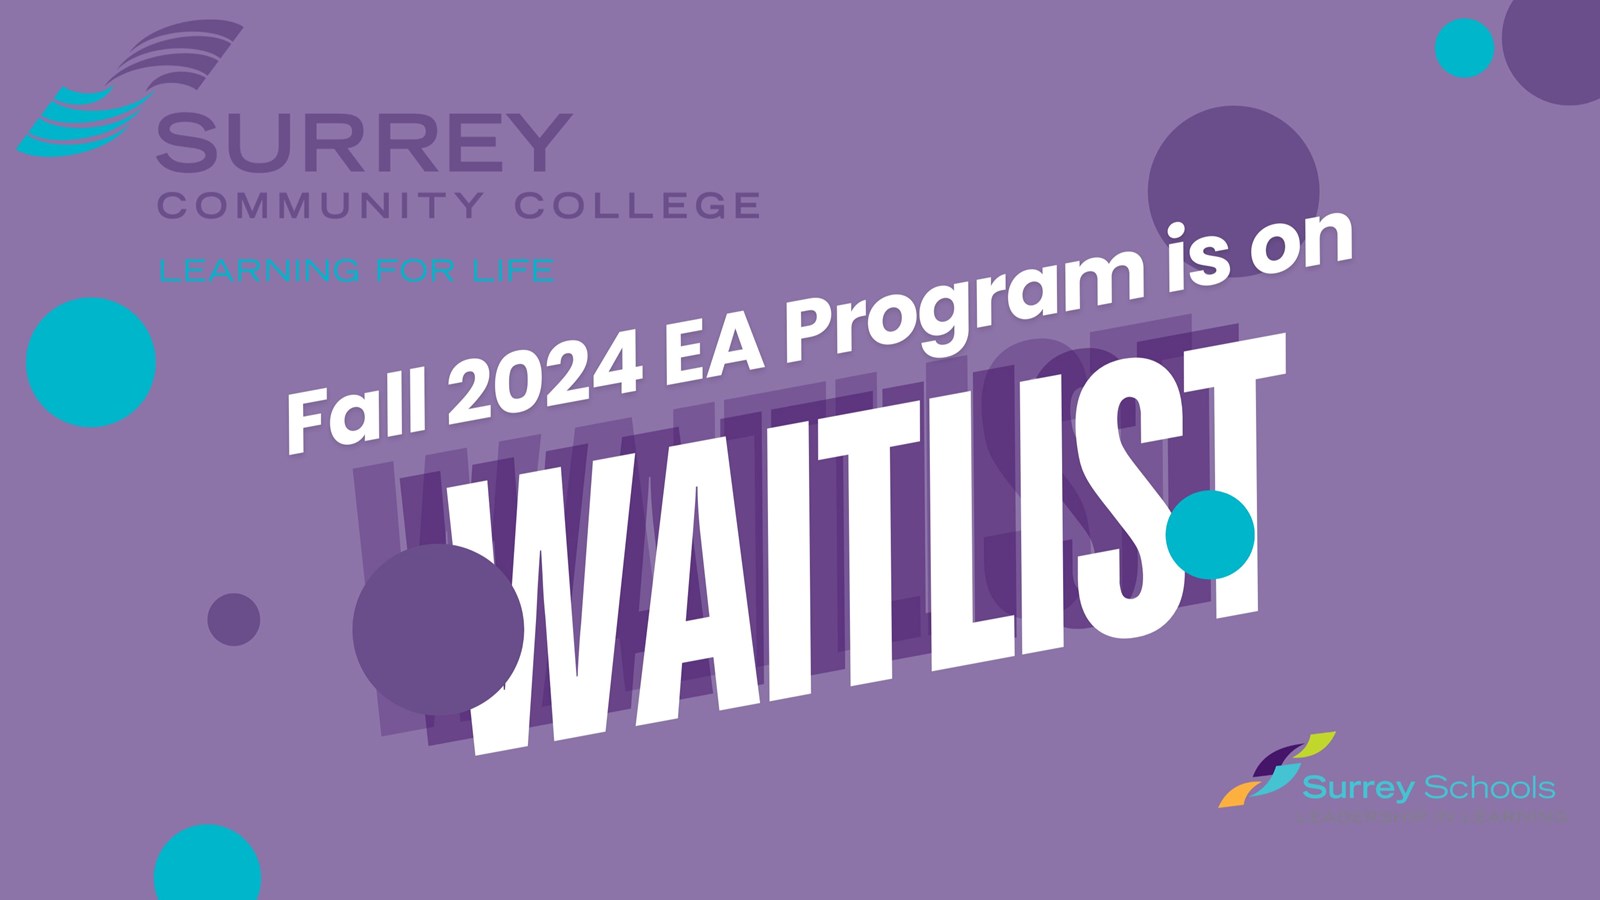 The Fall EA Session is now on Waitlist